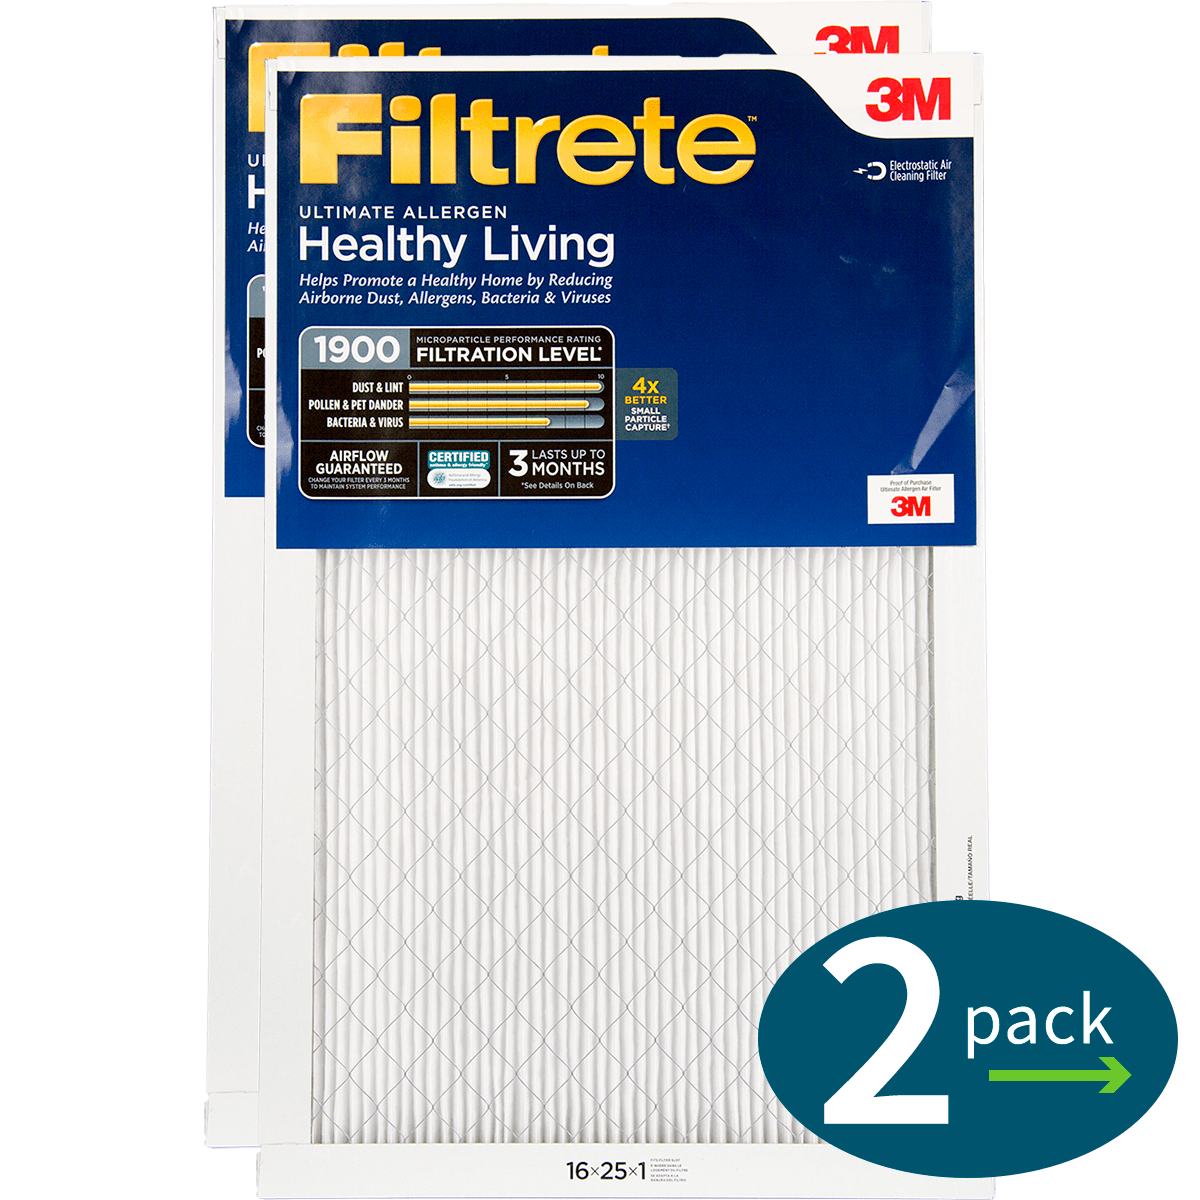 3m Filtrete Healthy Living 1900 Mpr Ultimate Allergen Reduction Filters 16x25x1 2-pack